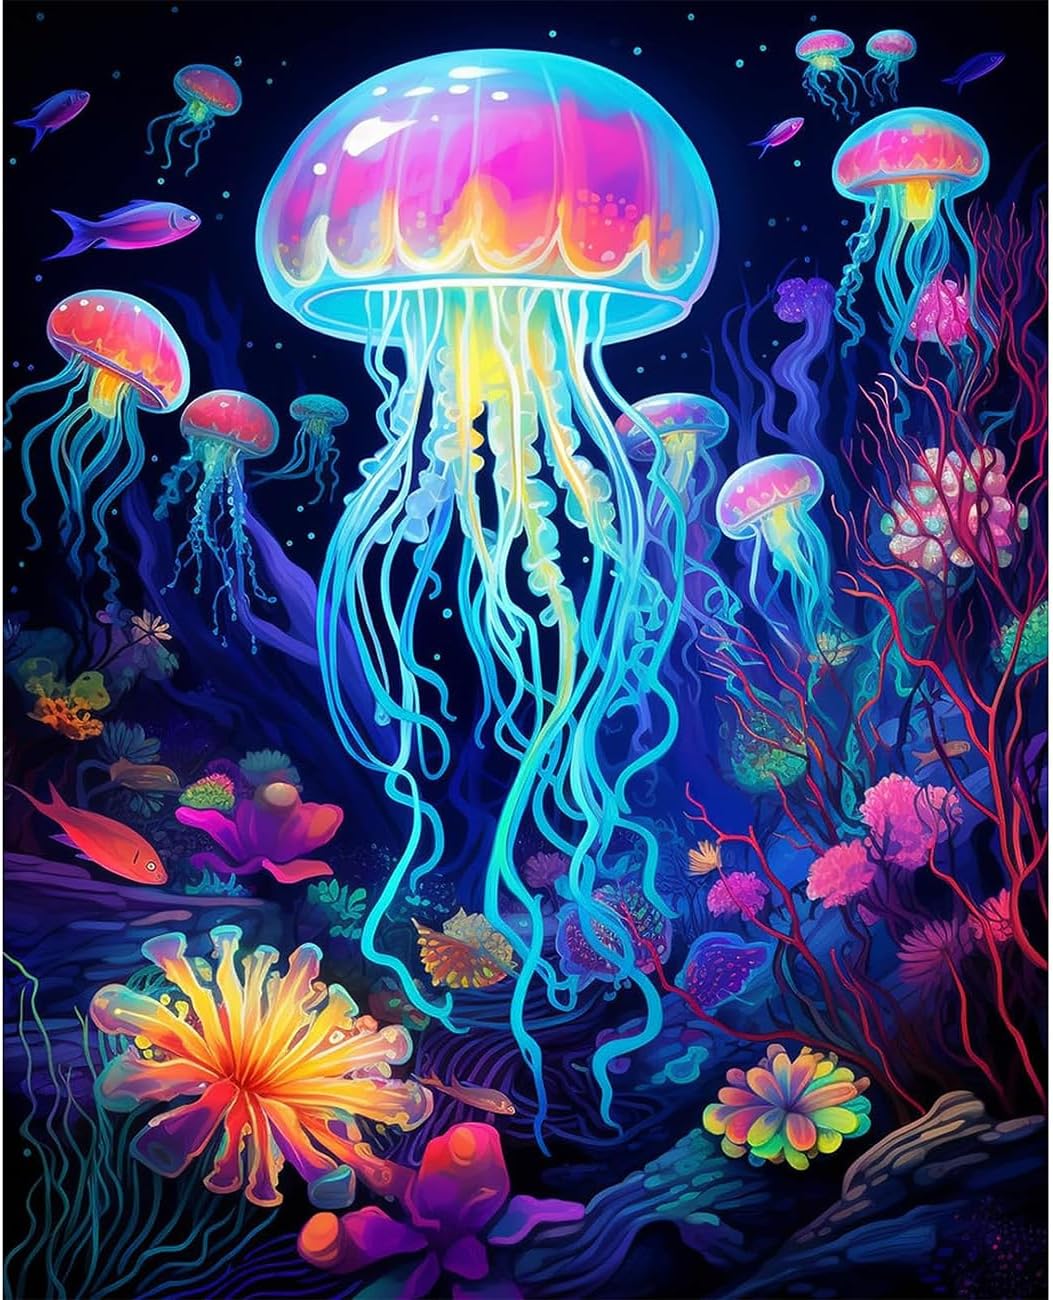 Adult Diamond Painting Kits Luminous Jellyfish Handmade 5D Diamond Art Kits for Children Novice Complete Drill Diamond Points Crystal Craft Kits for Wall Art and Bedroom D&#xE9;cor at Home: Presents 11.8 by 15.7 inches